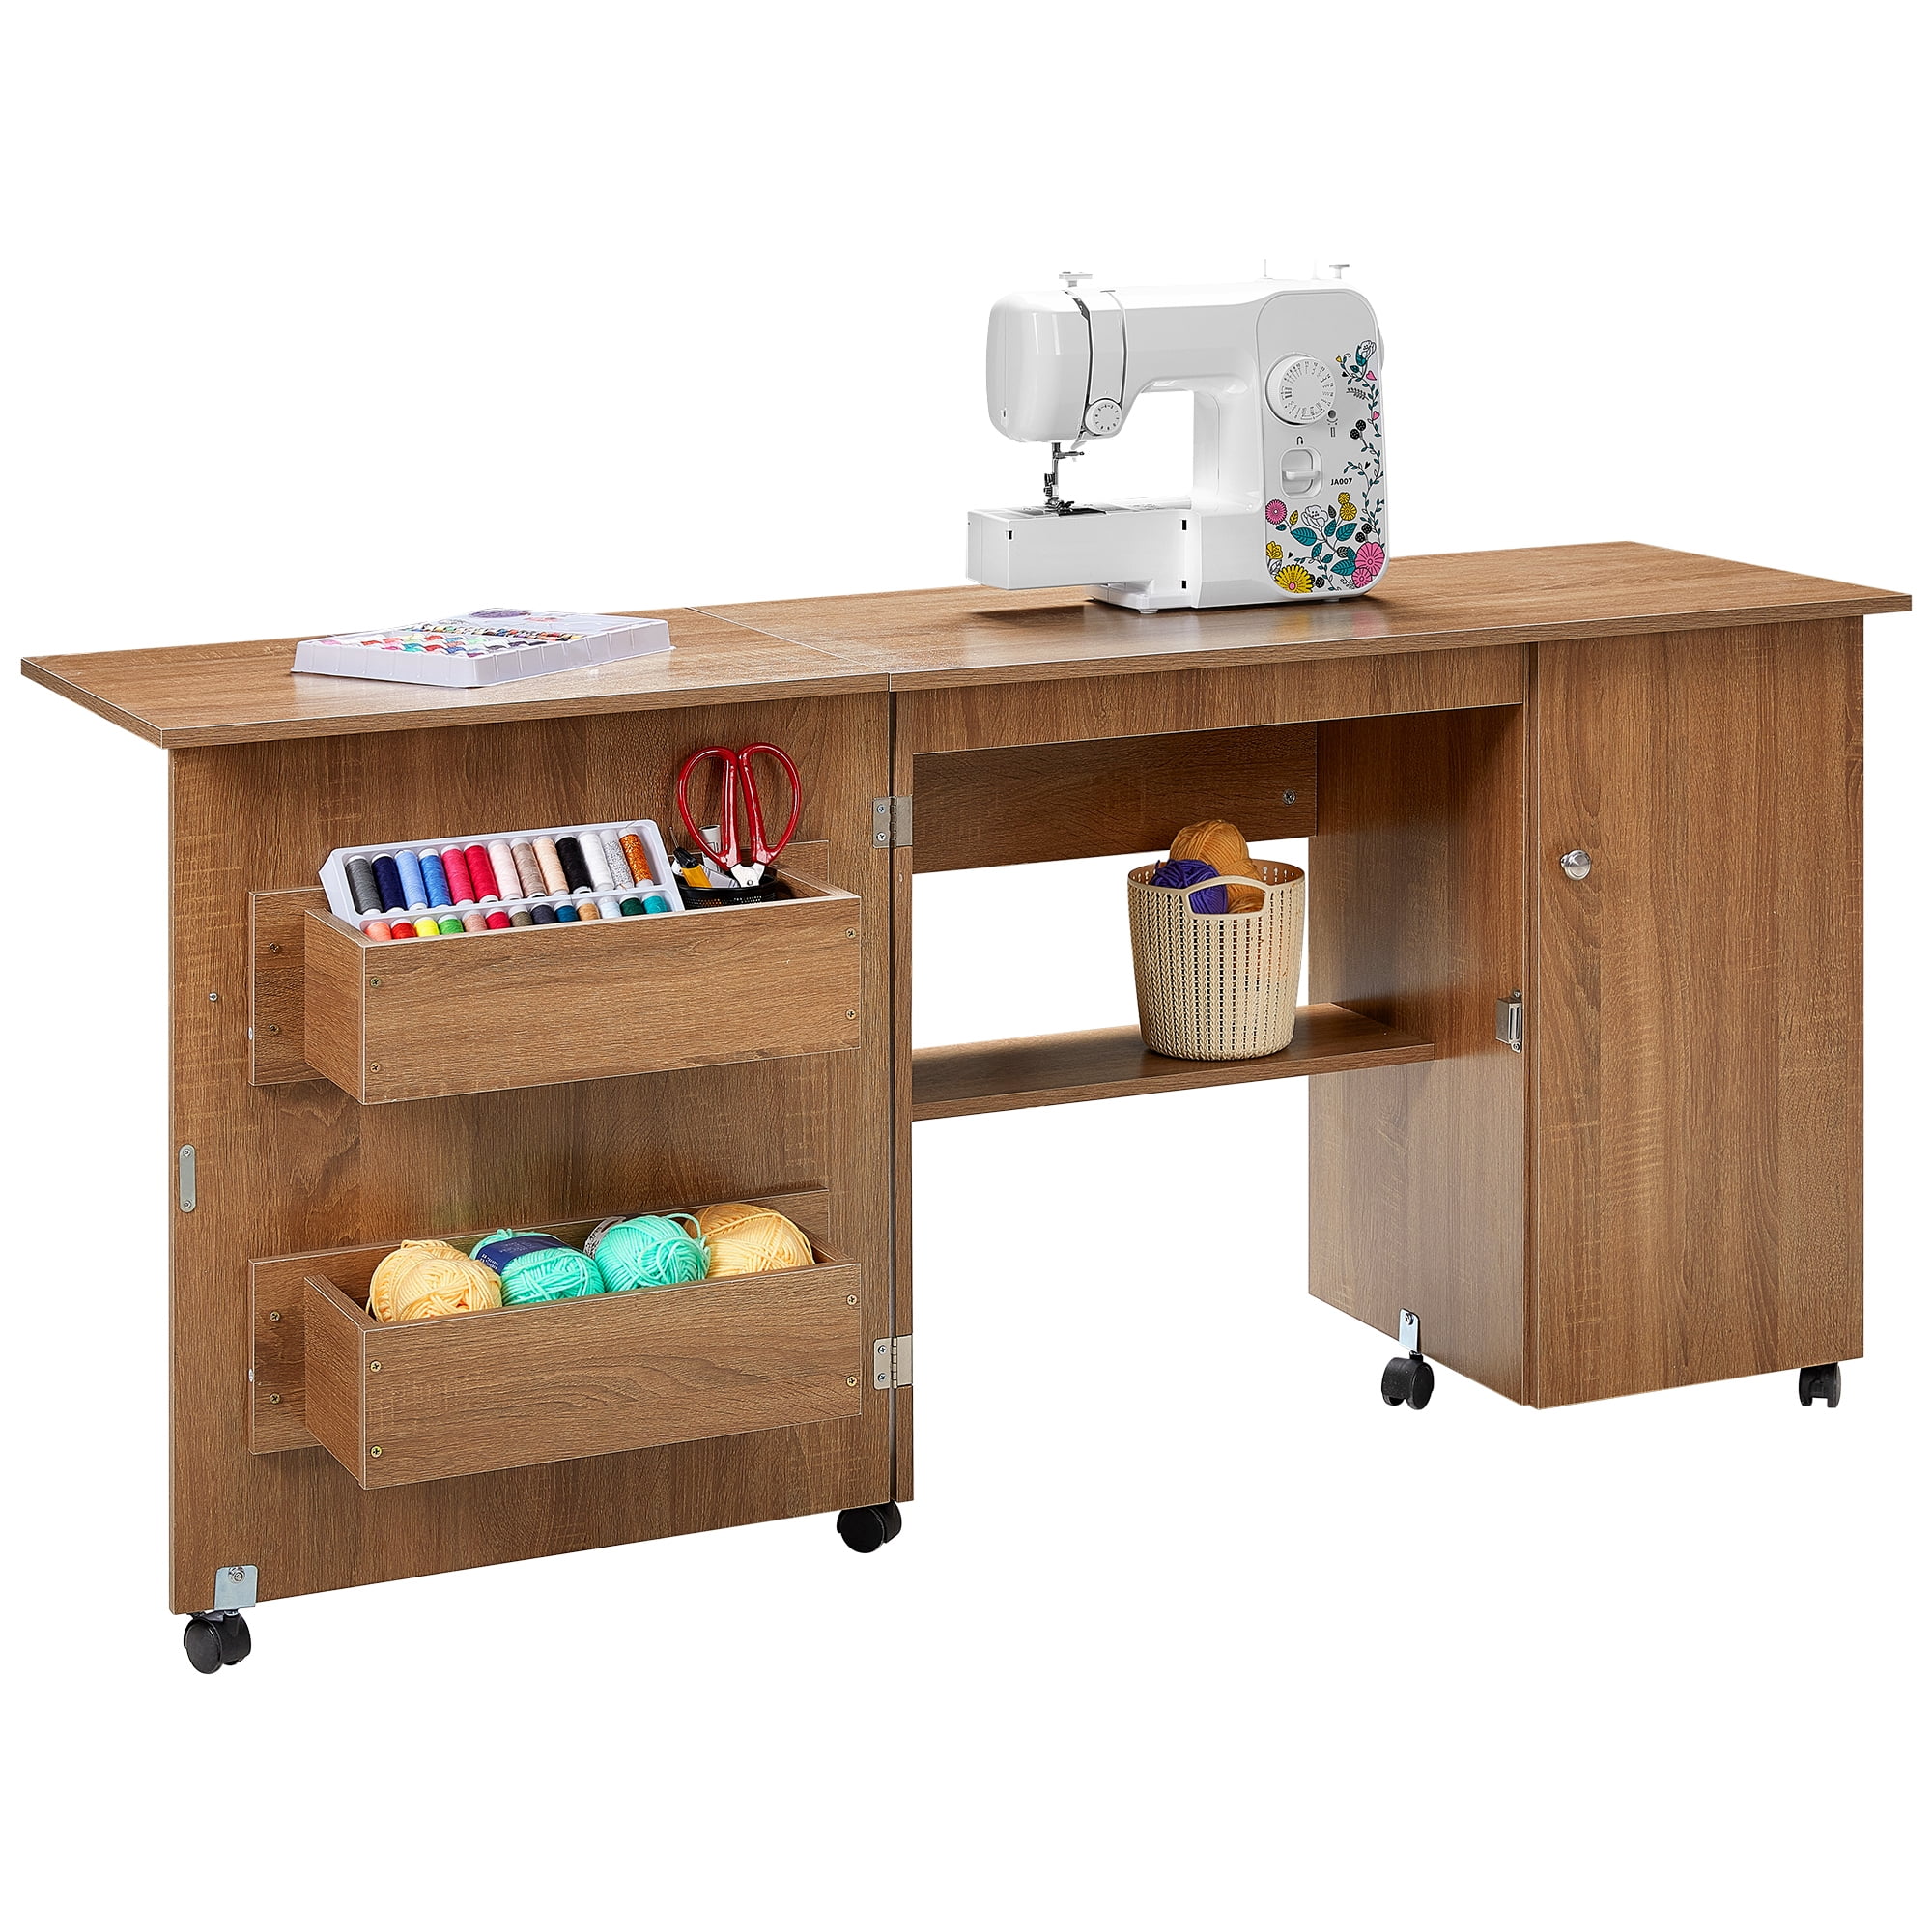 Homfa Folding Sewing Machine Table with Cabinet, 63 Inch Multipurpose Large  Sewing Craft Cart with Storage Shelves, Sewing Desk with Lockable Casters